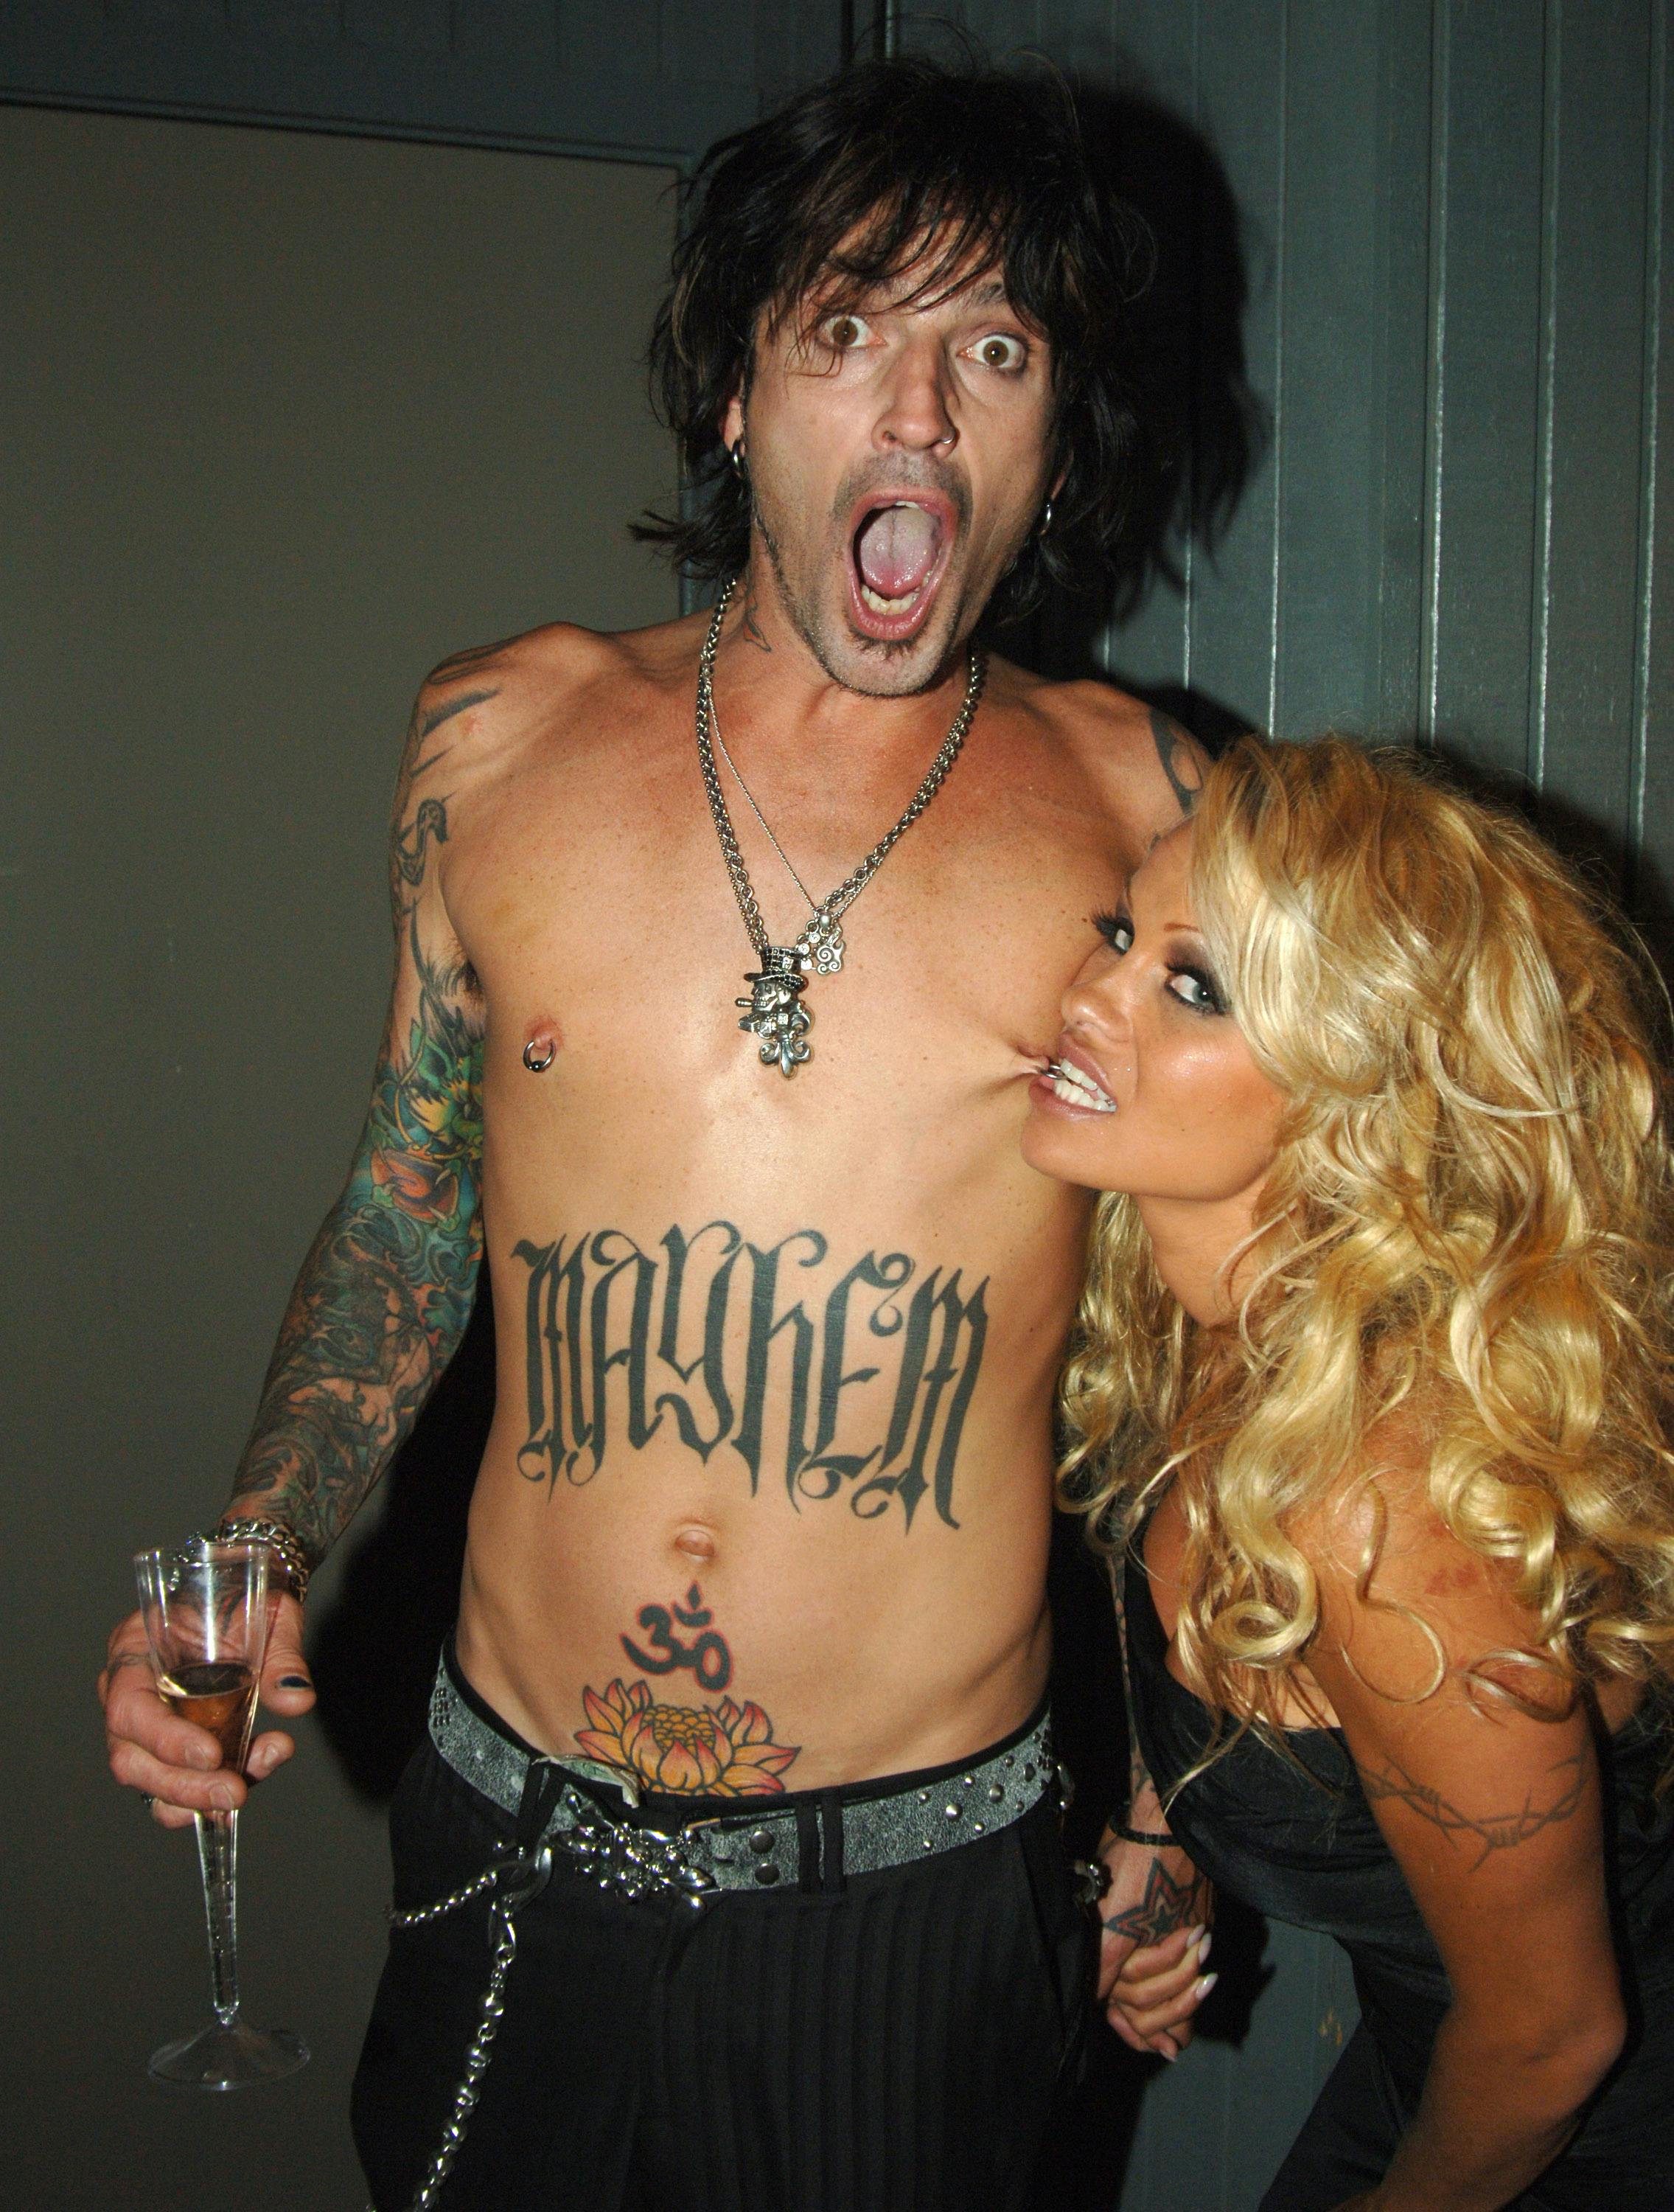 19 of Pamela Anderson and Tommy Lee's Most Famous Moments